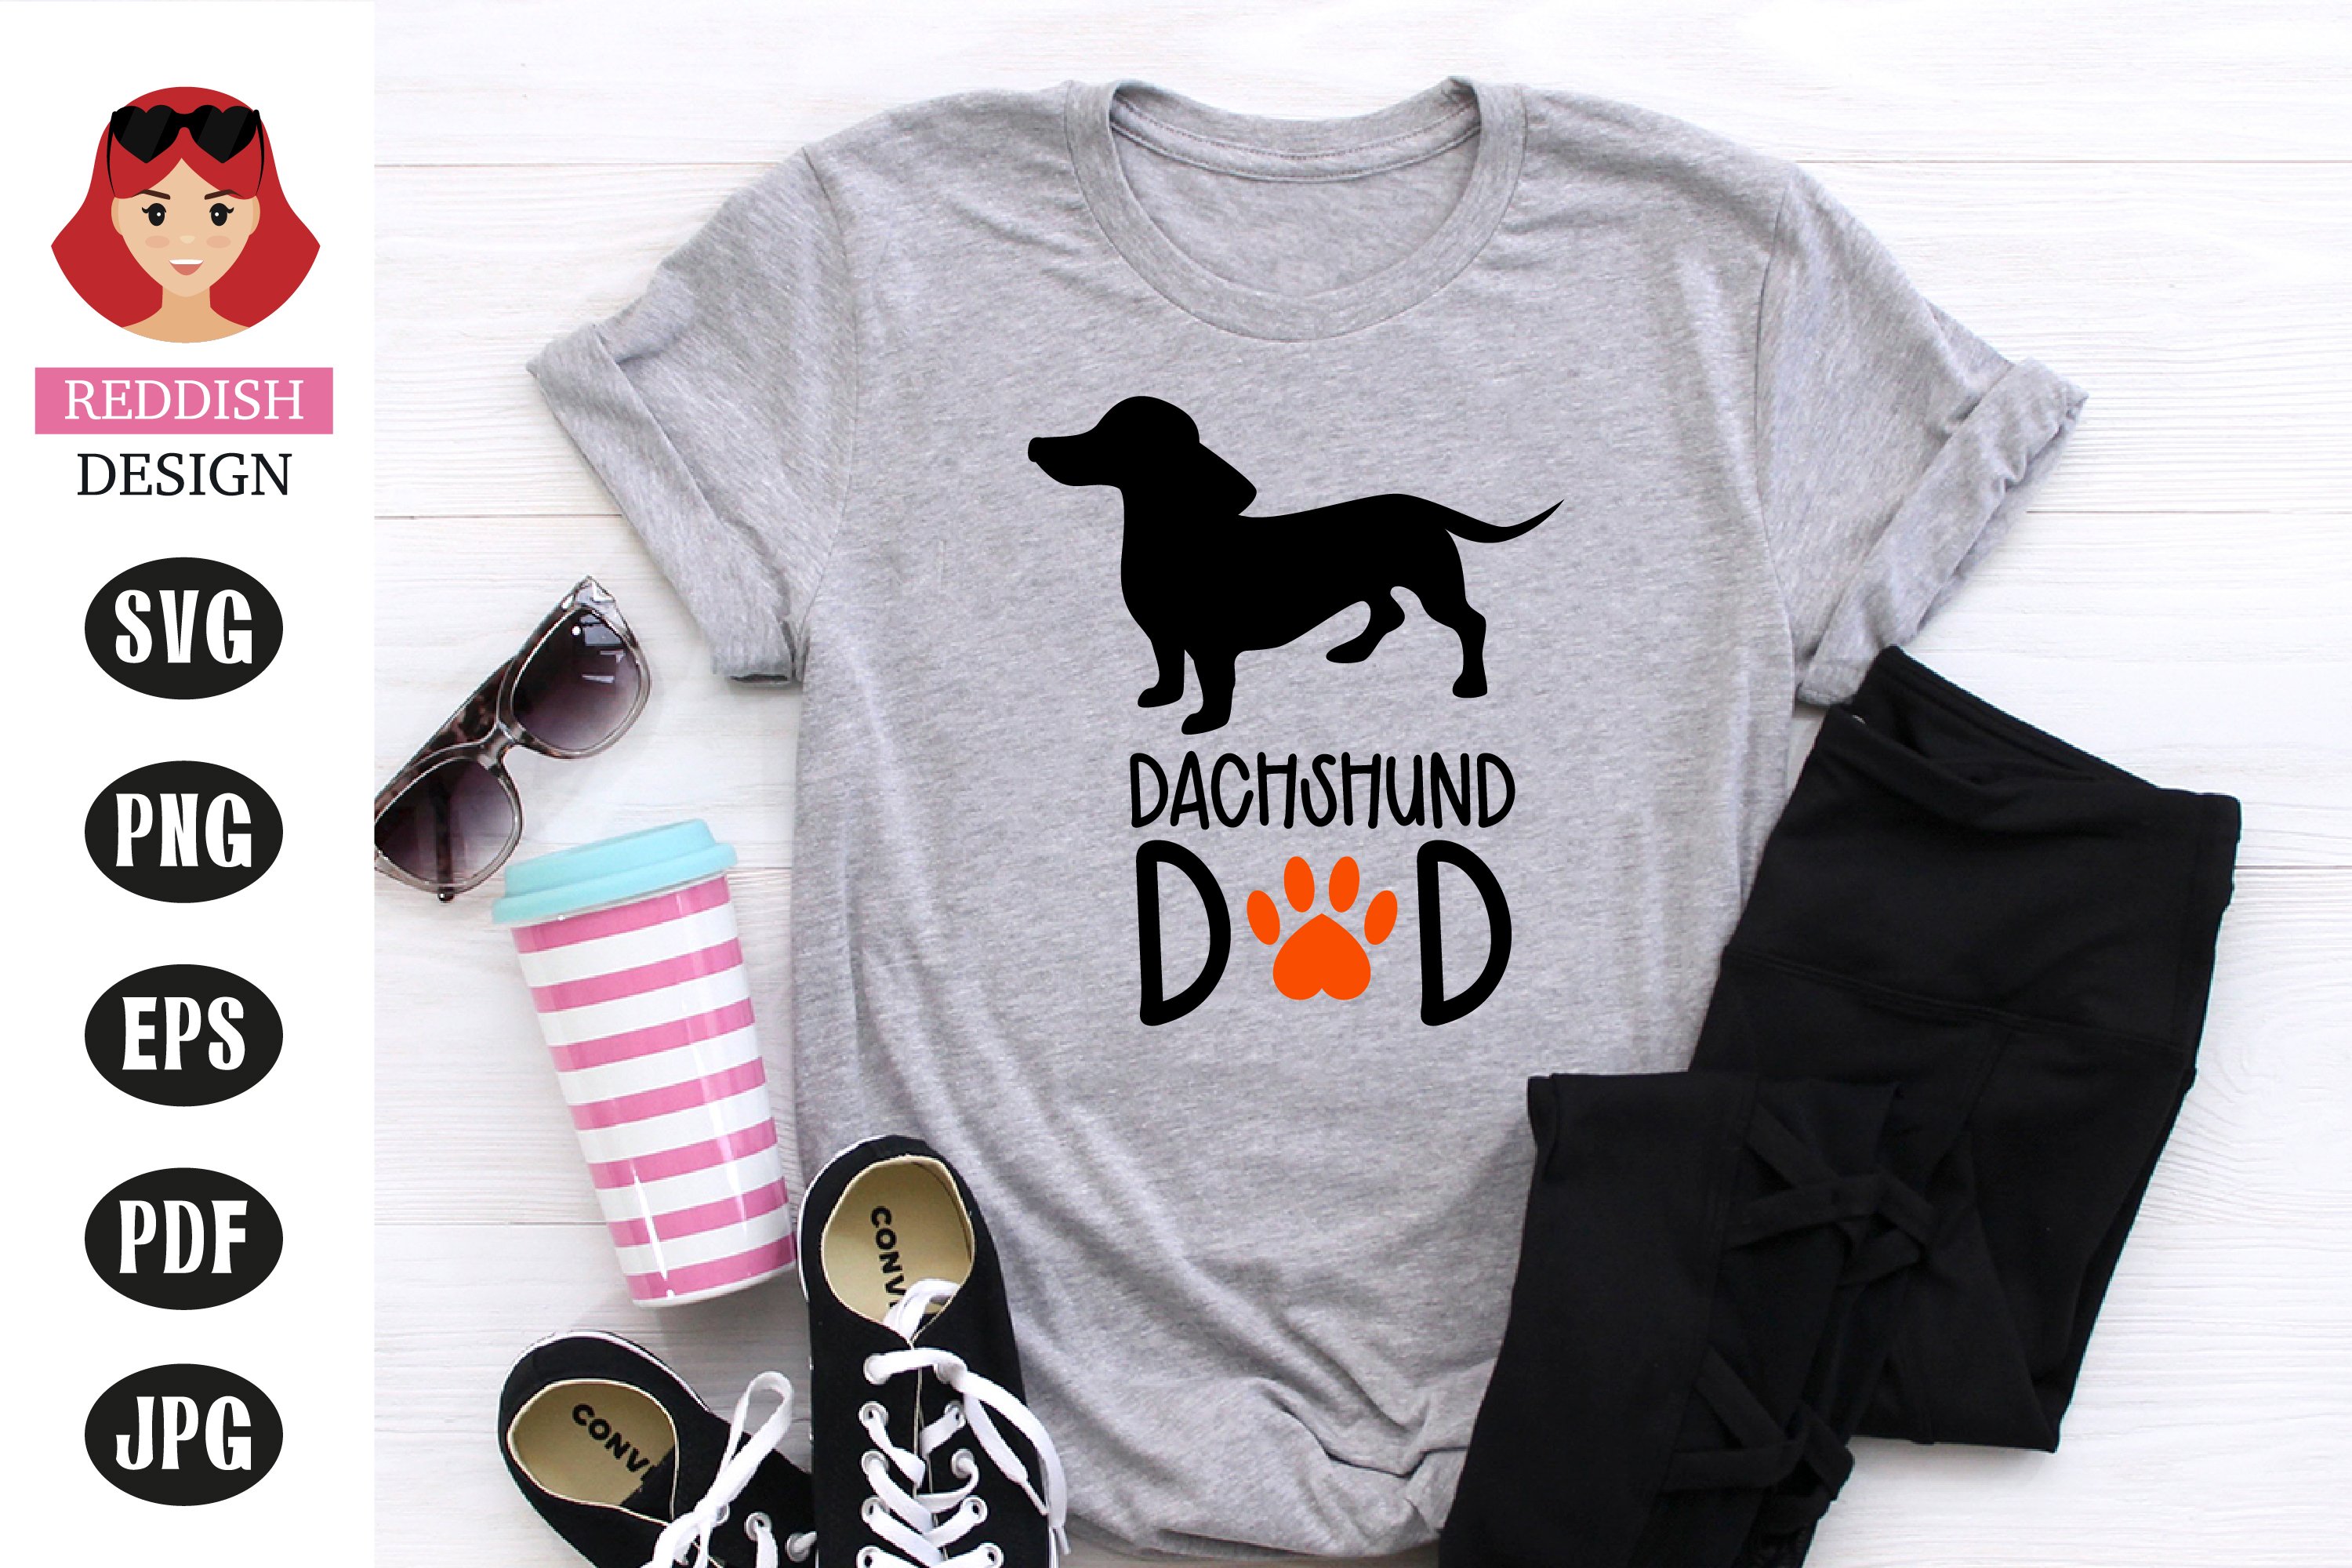 Grey t-shirt with dog.